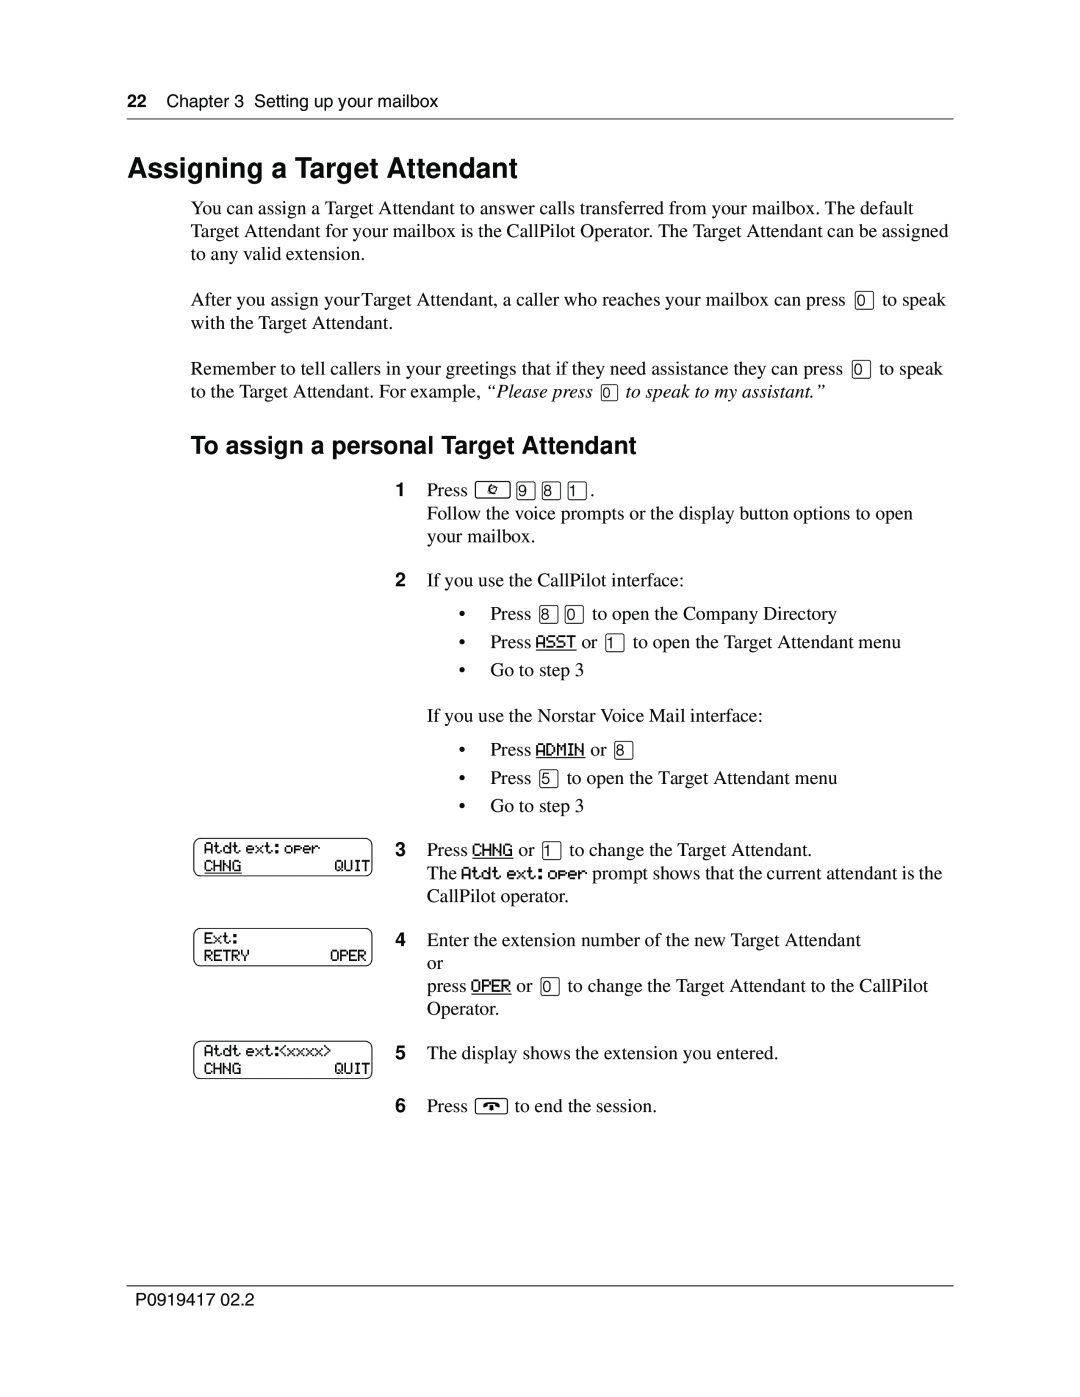 Nortel Networks CallPilot manual Assigning a Target Attendant, To assign a personal Target Attendant 